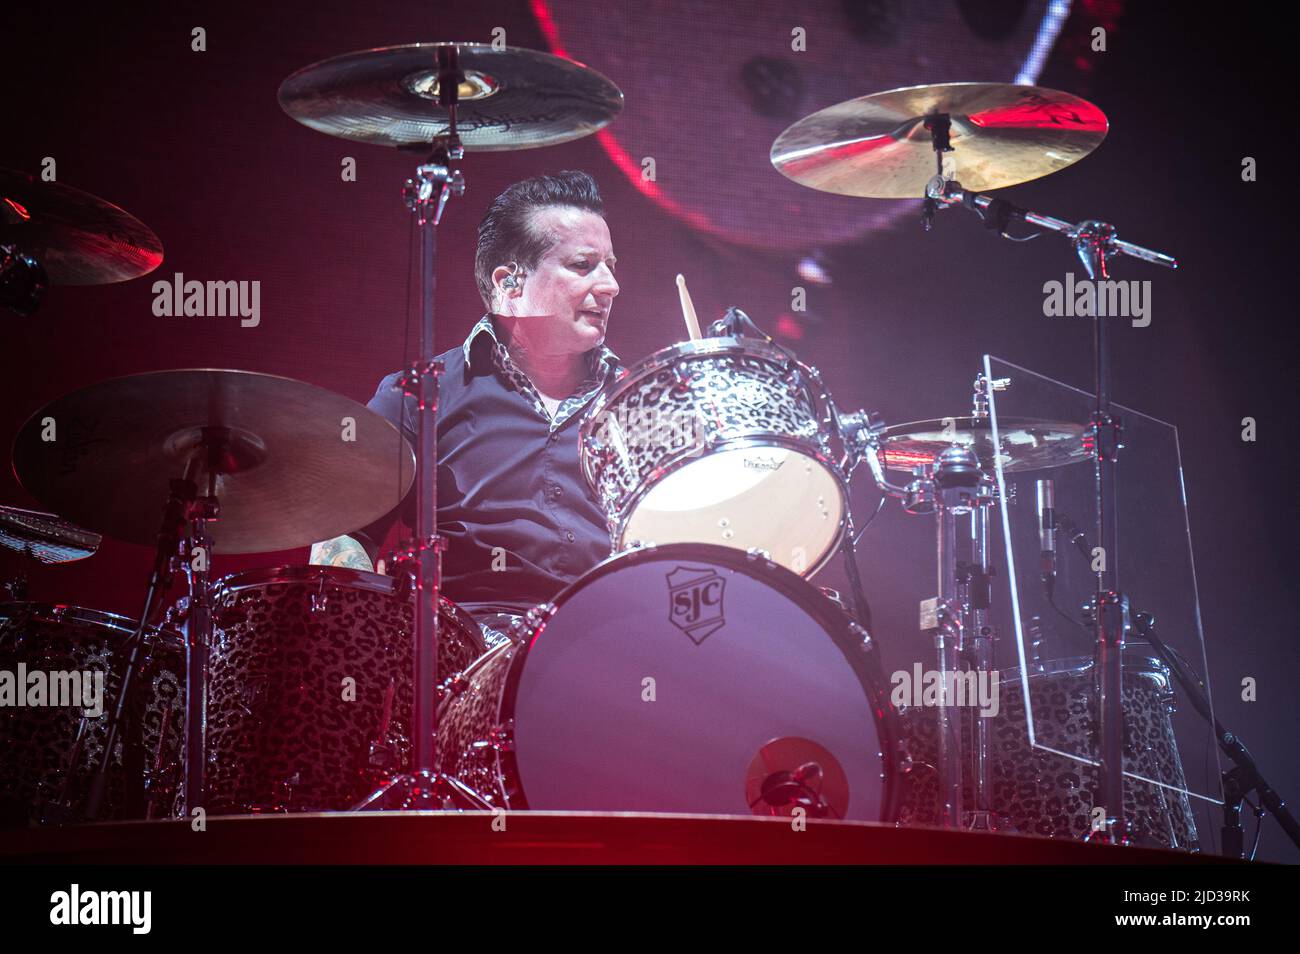 ITALY, MILAN, JUNE 15TH 2022: Tre Cool, drummer of the American punk rock band GREEN DAY preforms live on stage at Ippodromo SNAI La Maura during the 'I-Days Festival 2022' Stock Photo